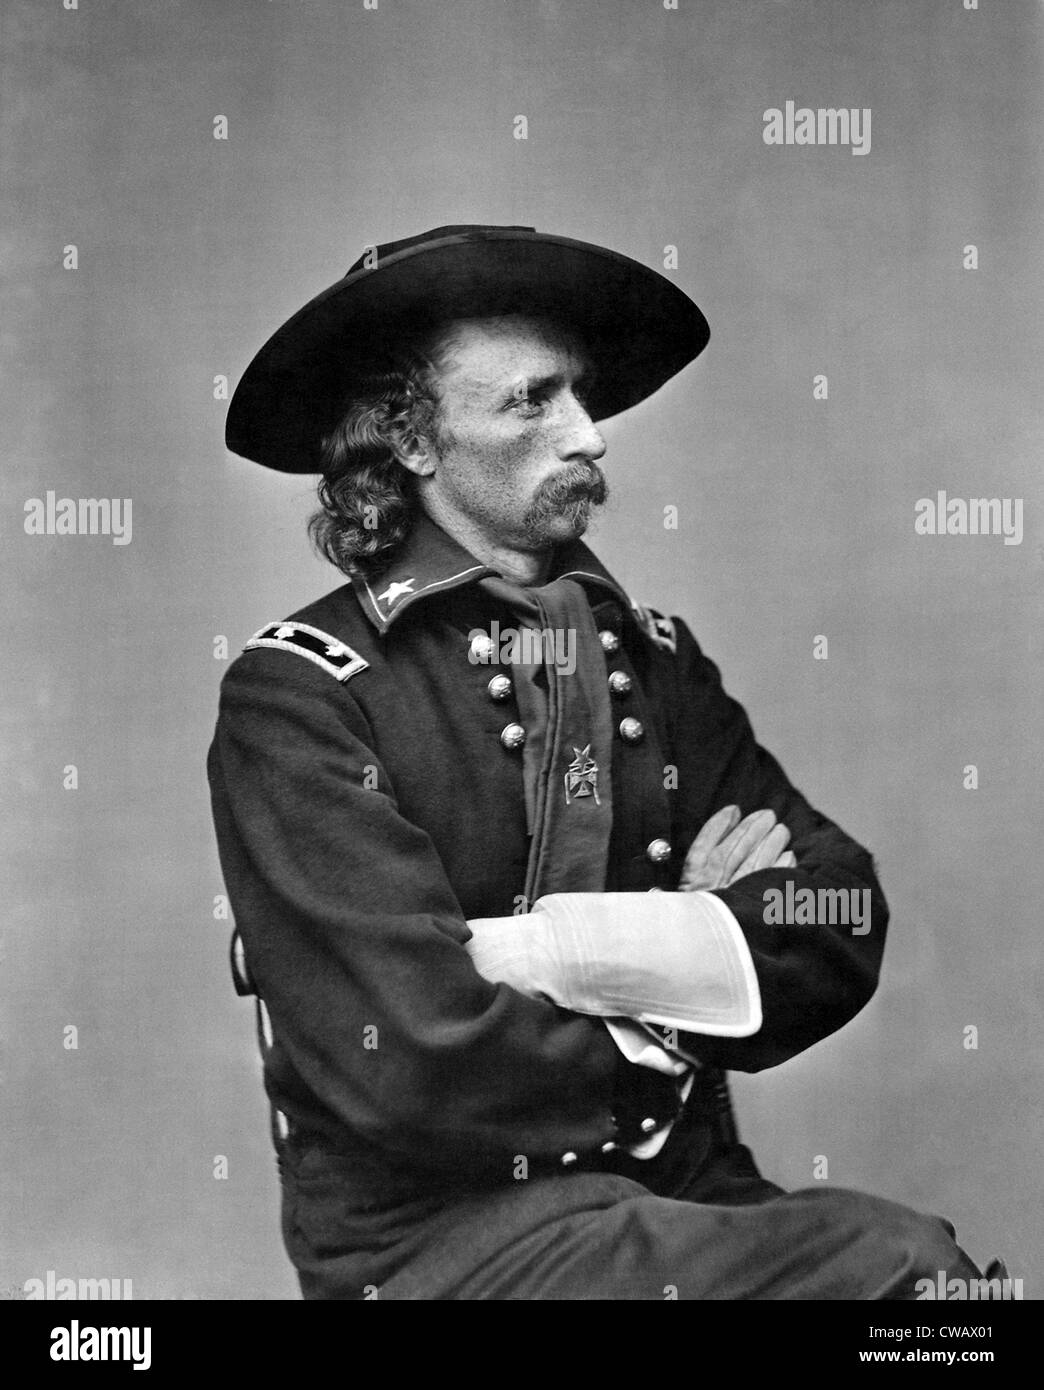 George Armstrong Custer, U.S. Army major general, ca. 1863 Stock Photo